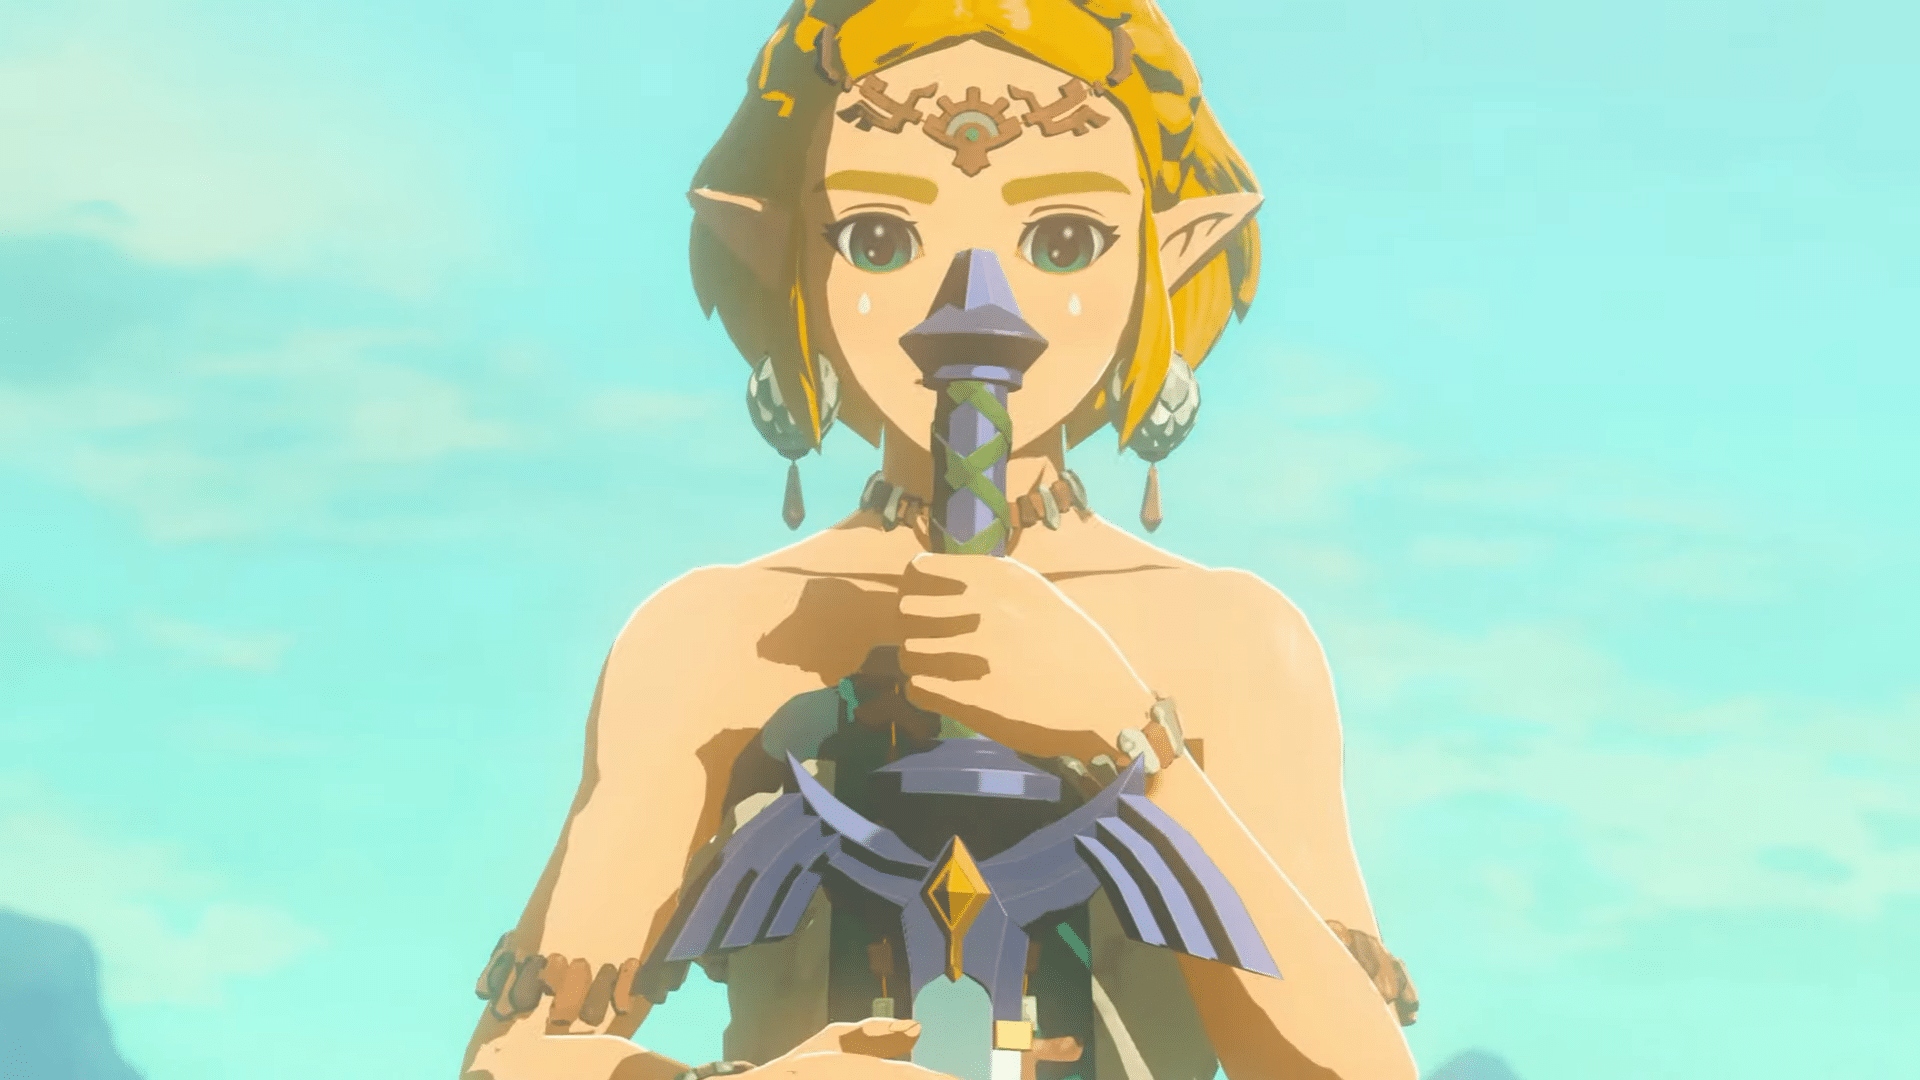 Zelda May Become Playable in Future The Legend of Zelda Titles, Says Eiji Aonuma